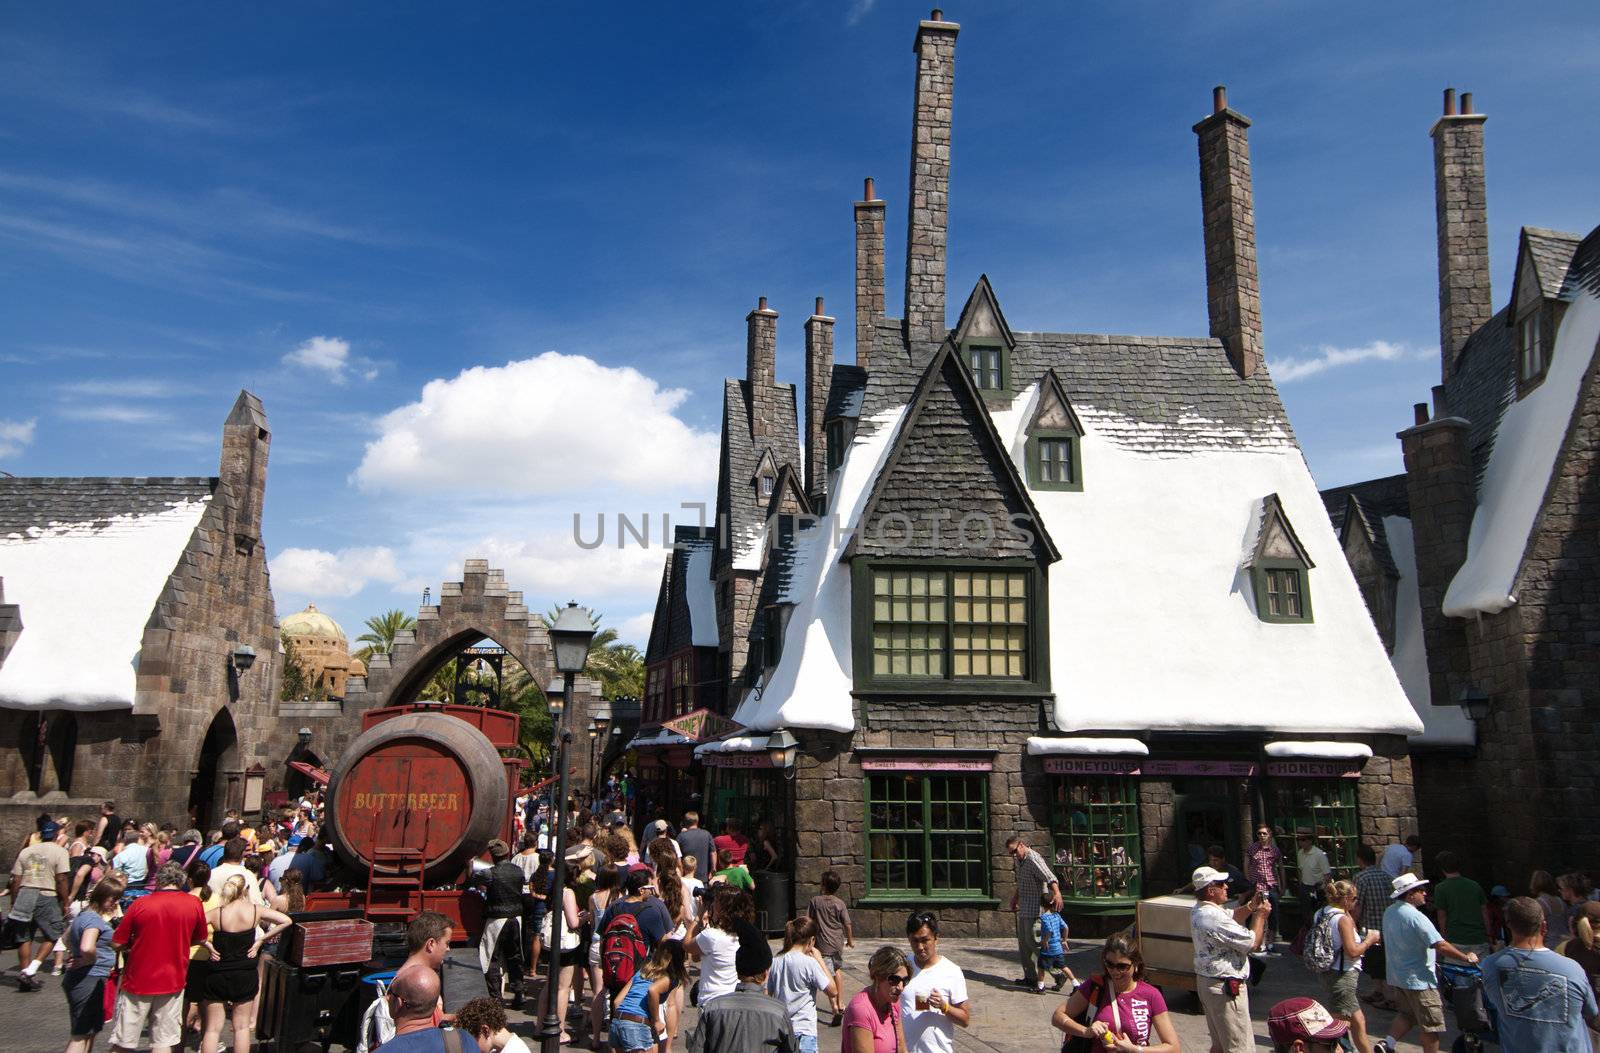 Hogsmeade at the Wizarding World of Harry Potter, Florida, 15th October 2010.  It took 5 years and $265 million to build.